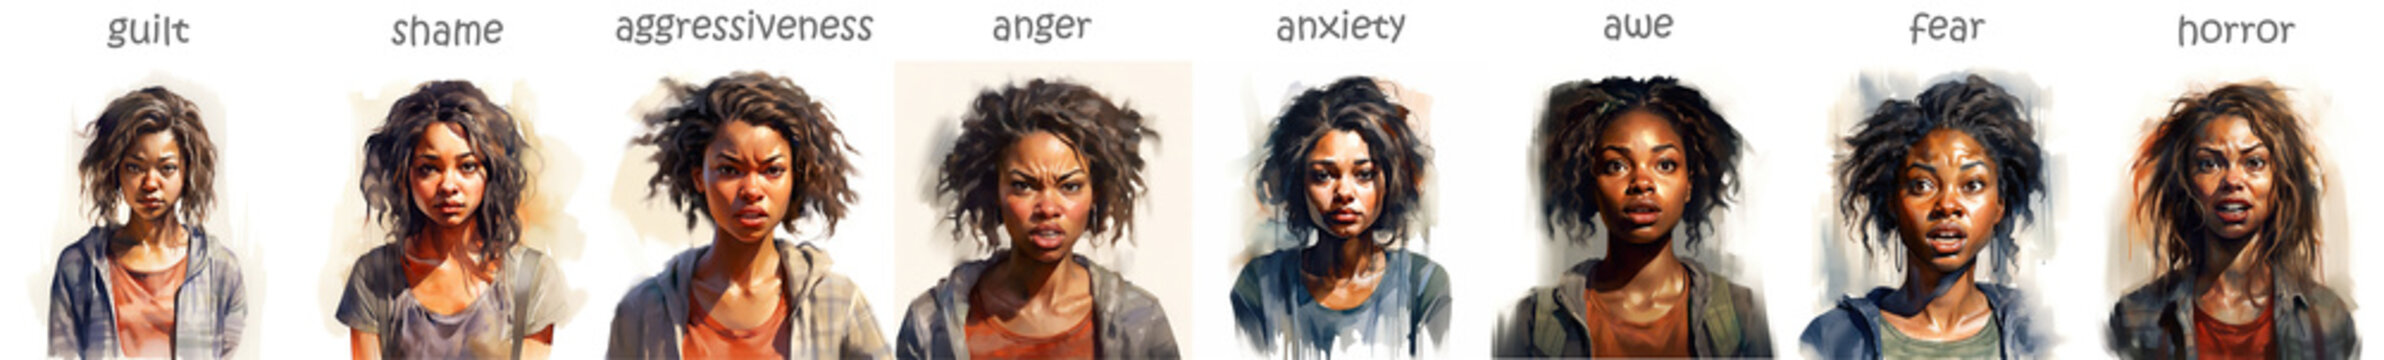 Set of different basic emotions illustrations: guilt, shame, aggressiveness, anger, anxiety, awe, fear, horror